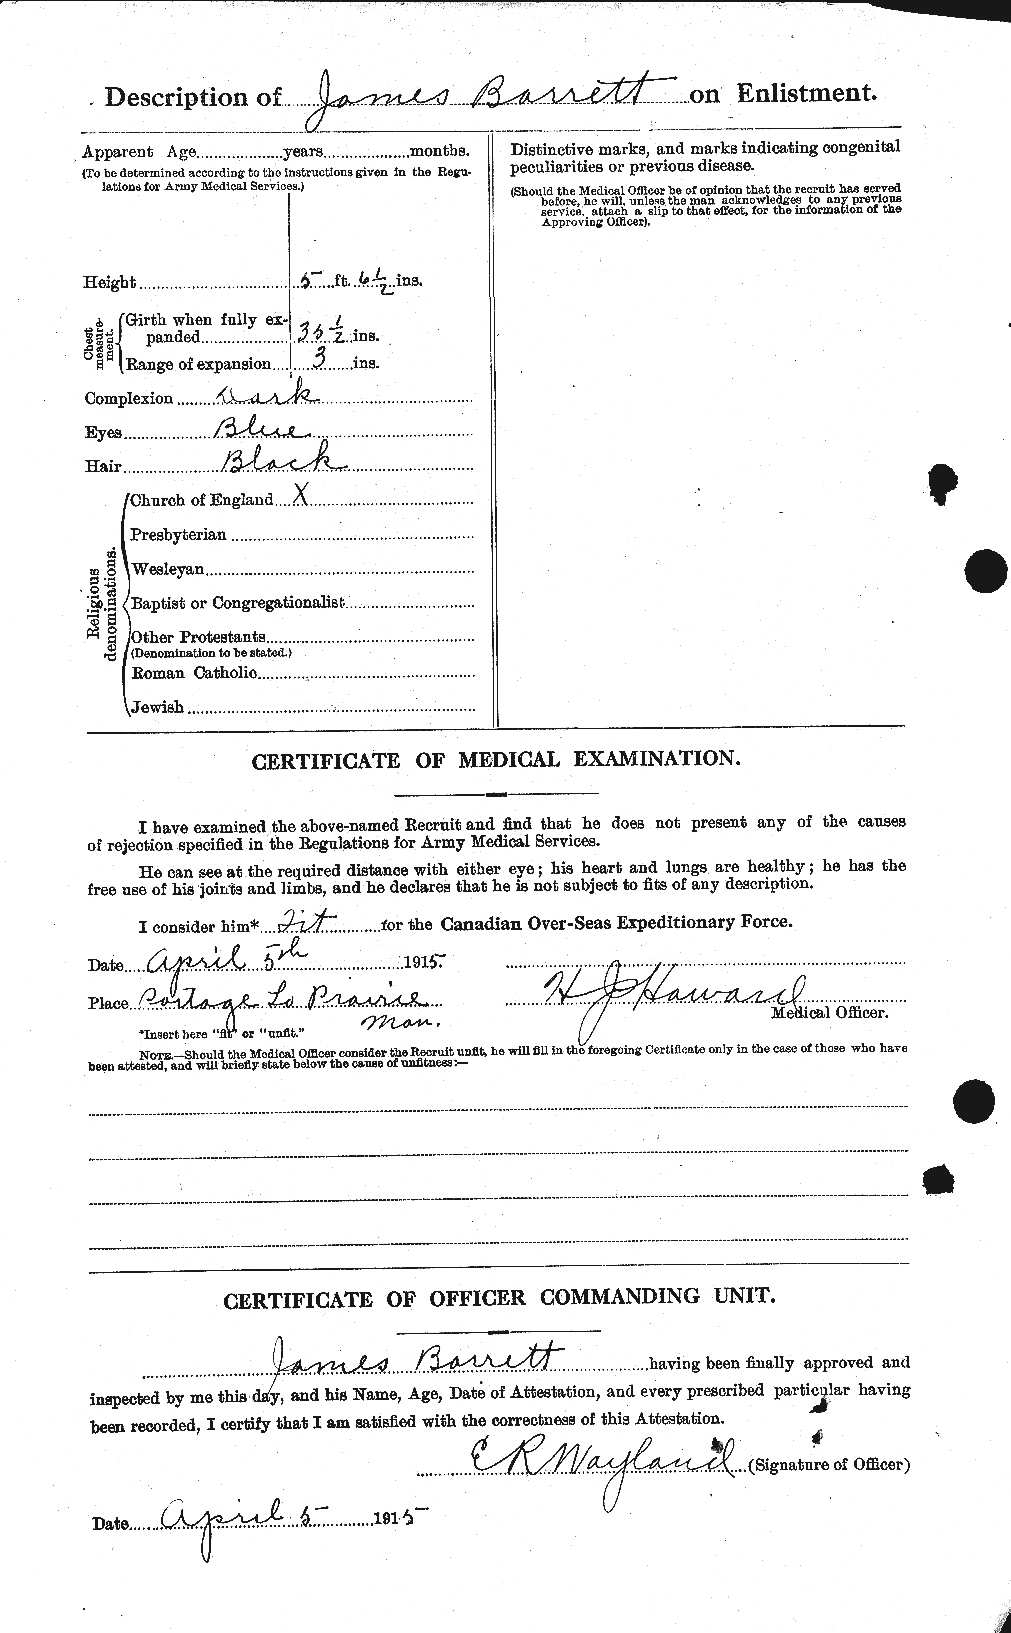 Personnel Records of the First World War - CEF 220264b